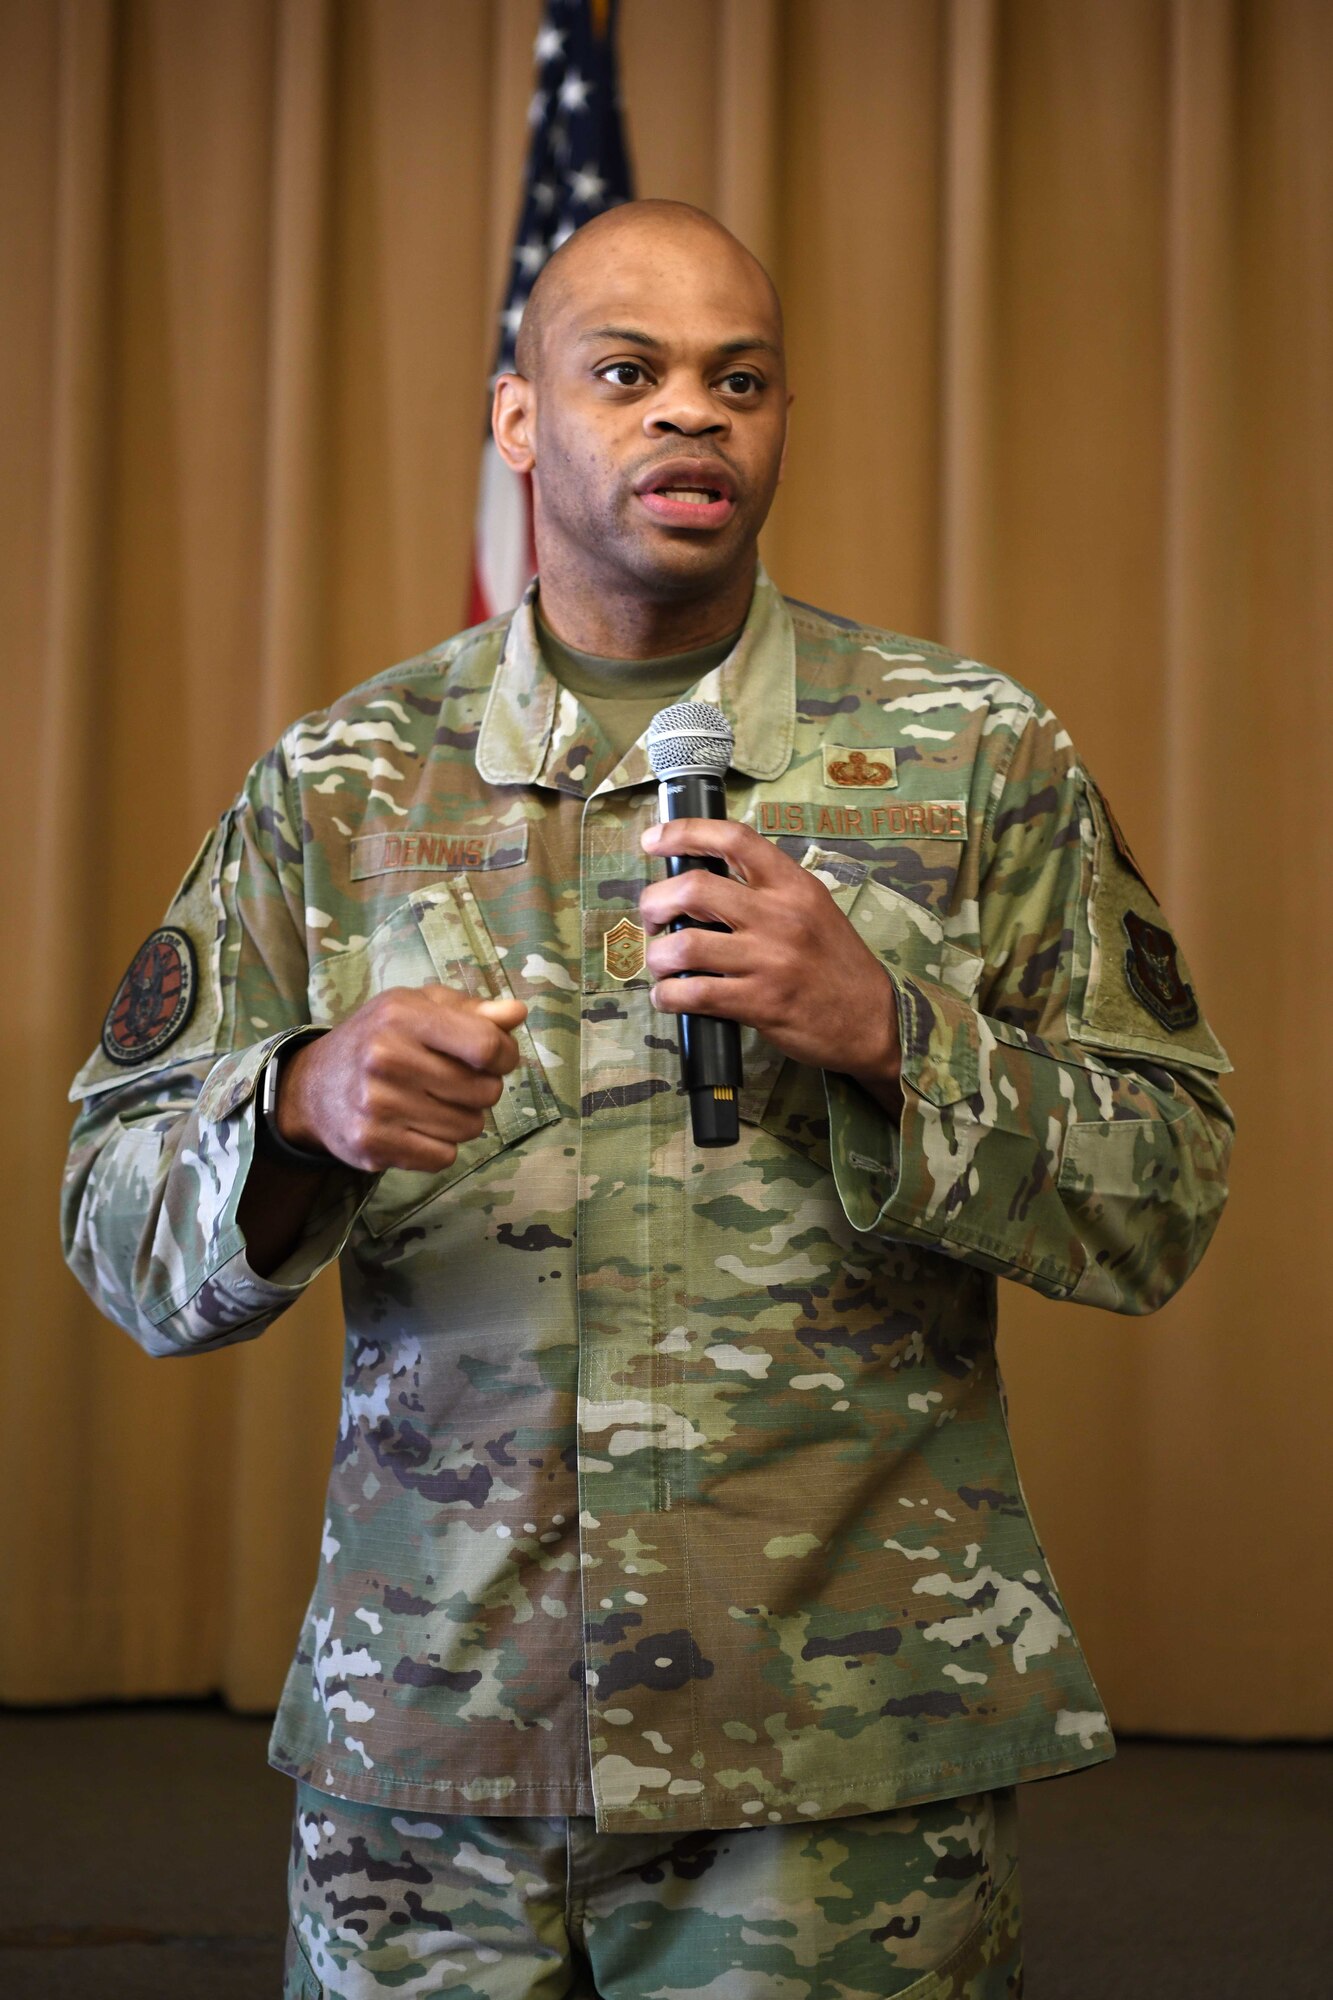 Air Force Reserve Command First Sergeant Functional Manager Chief Master Sgt. Travon Dennis shares his final thought about the first-ever Southwest Regional First Sergeants Symposium at Luke Air Force Base, Ariz., April 26-30. Dennis was proud of the team for exceeding his expectations and reminded them that they were not just crisis managers but a vital part in the leadership triad that ensures and supports a mission-ready force.